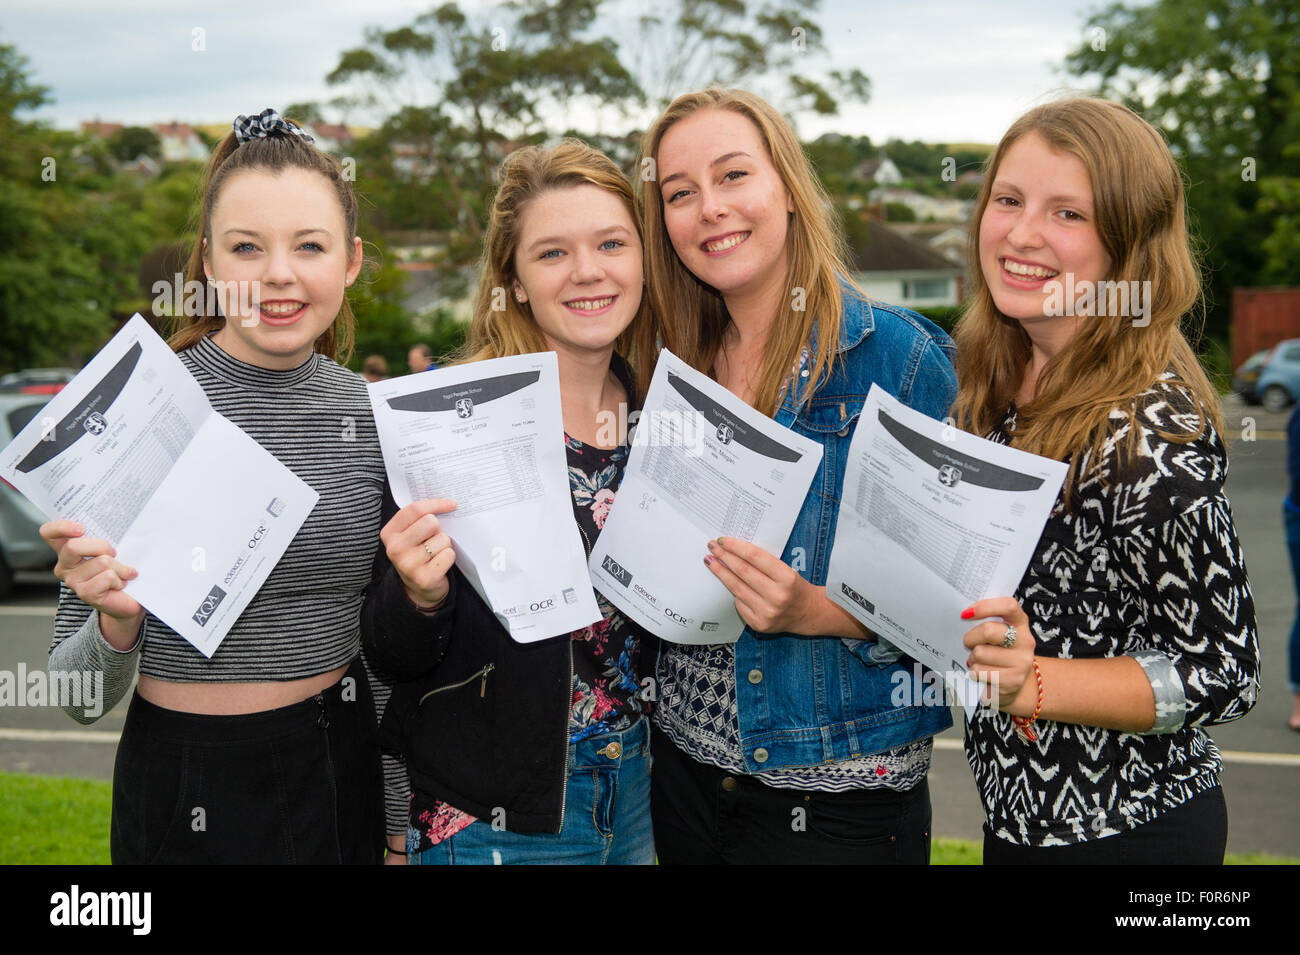 Aberystwyth Wales UK, Thursday 20 August 2015   Four 4 Year 11 teenage girls students Emily Walsh, Lorna Harper, Megan Evans and Robin Harris at Penglais School in Aberystwyth collecting their GCSE examination results. Across the UK GCSE grades A* to C have risen slightly this year, but top A* and A grades are marginally lower. Overall the proportion of A* to C grades rose to 69%, up from 68.8% in 2014, but A* grades fell by 0.1% photo Credit:  Keith Morris/Alamy Live News Stock Photo